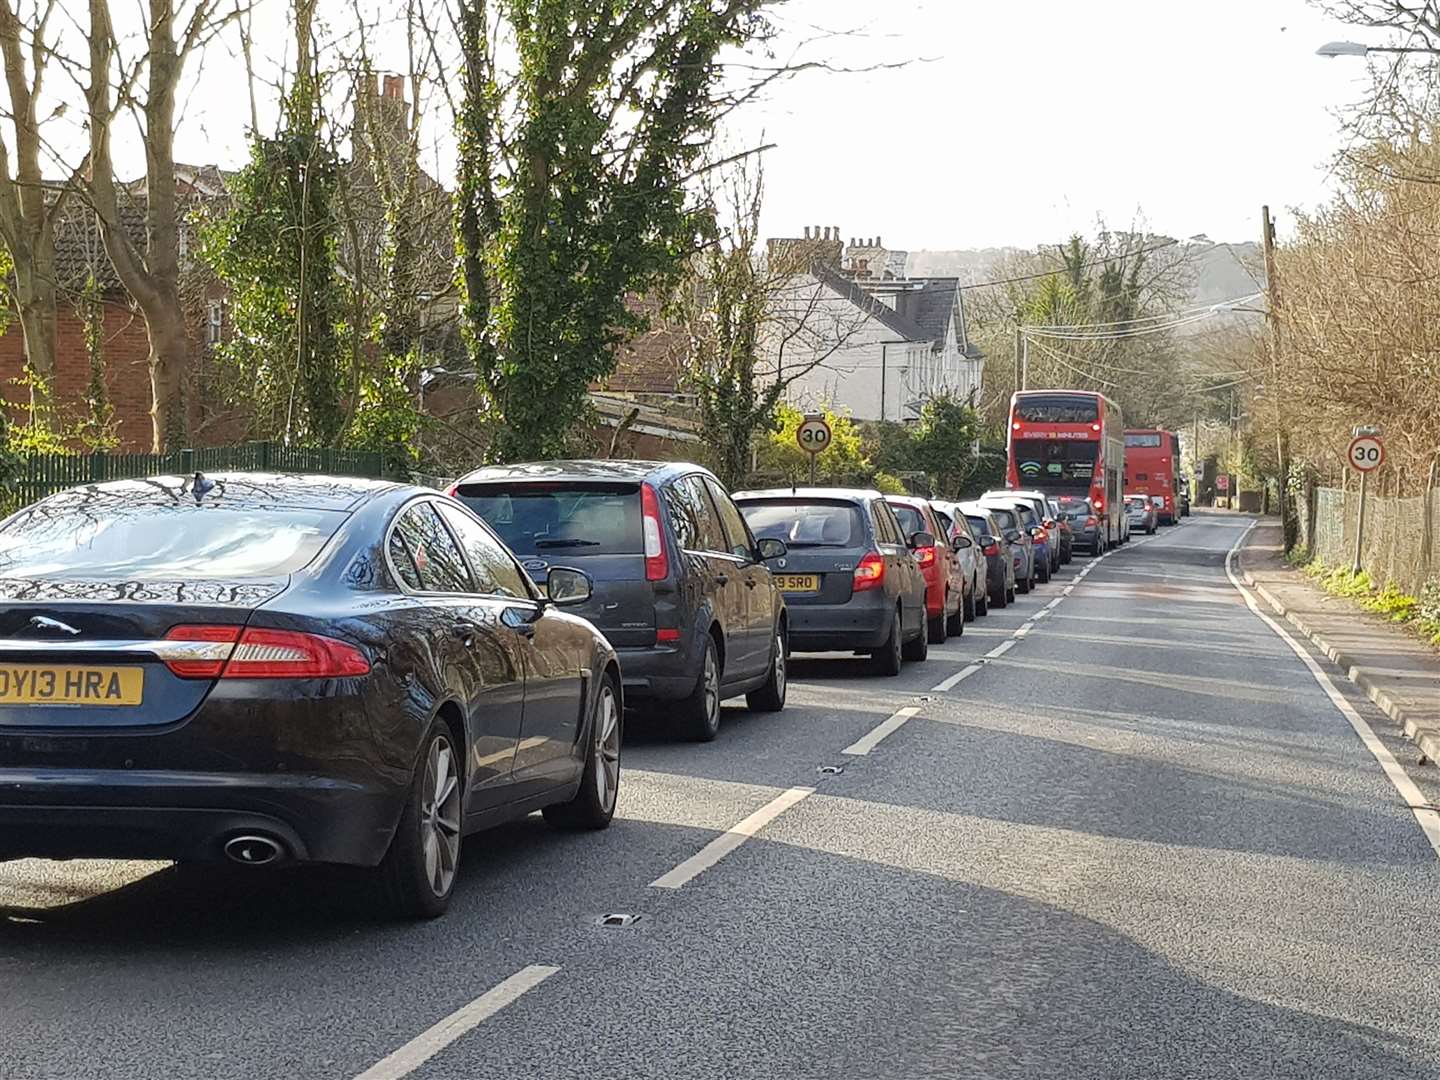 Rush-hour drivers on Sturry Hill at a standstill